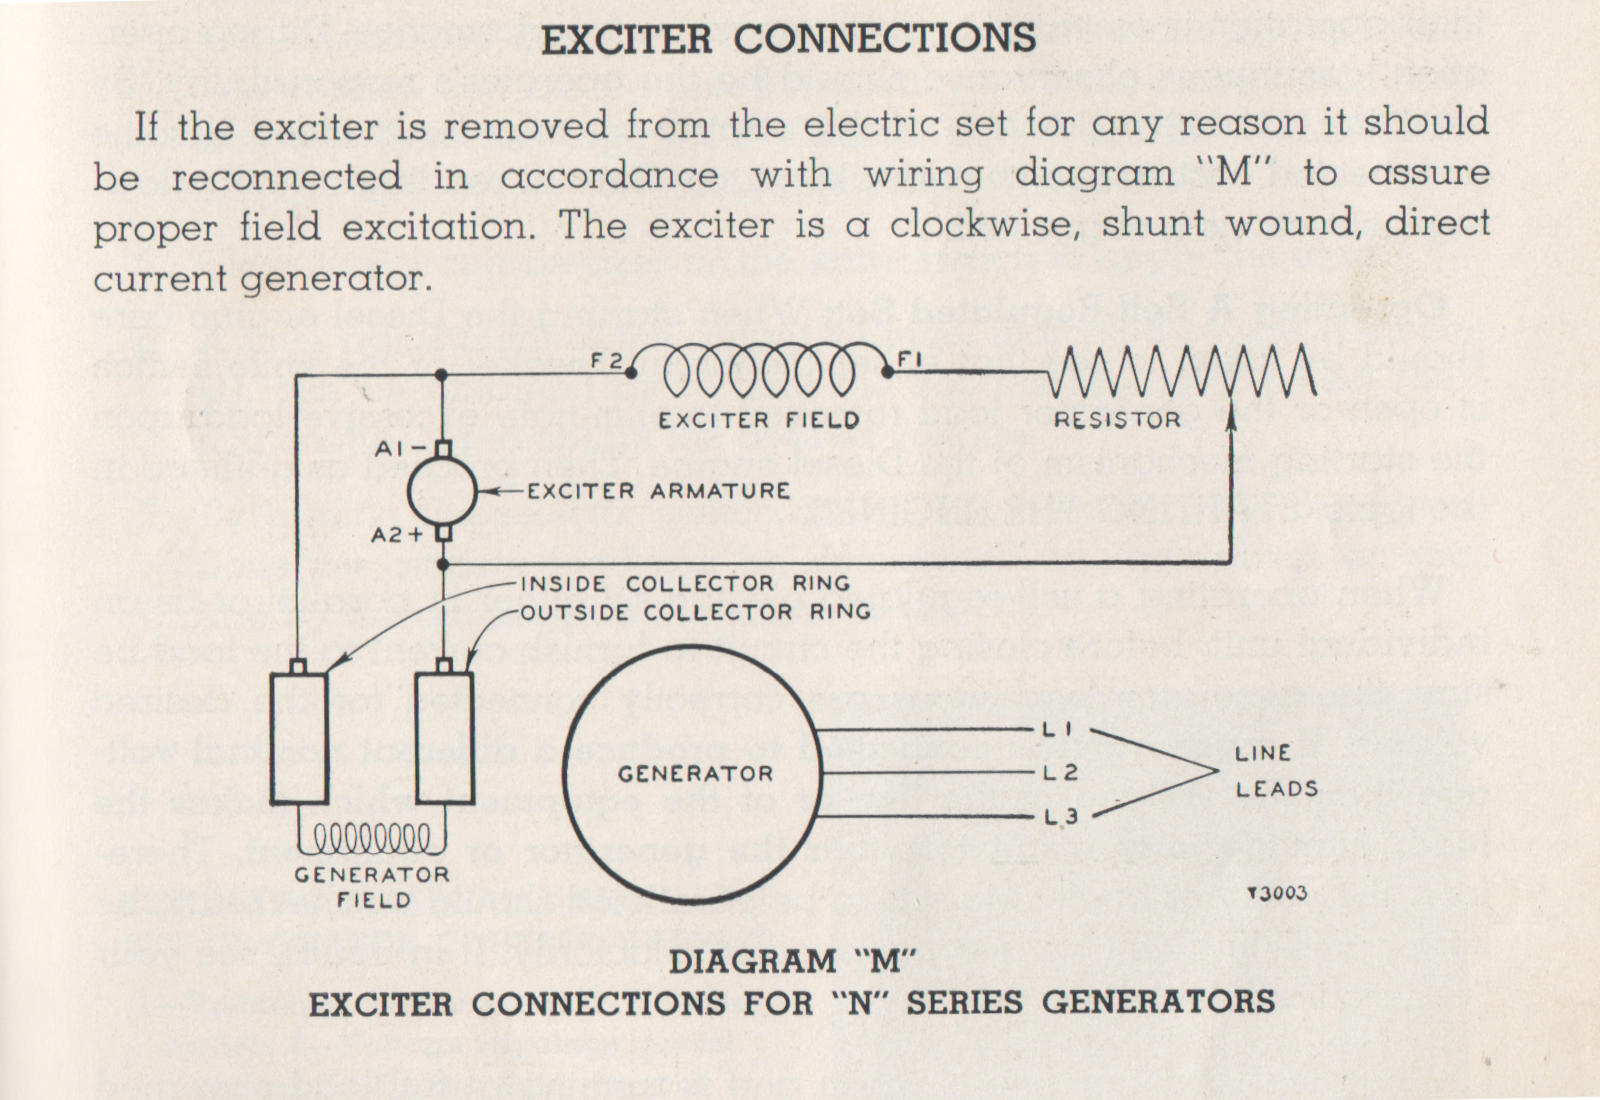 Circuit diagram. Top text above the diagram: If the exciter is removed from the electric set for any reason it should be reconnected in accordance with wiring diagram "M" to assure proper field excitation. The exciter is a clockwise, shunt wound, direct current generator. Bottom text:Exciter connections. Diagram "M". Exciter connection for "N" series generators. 